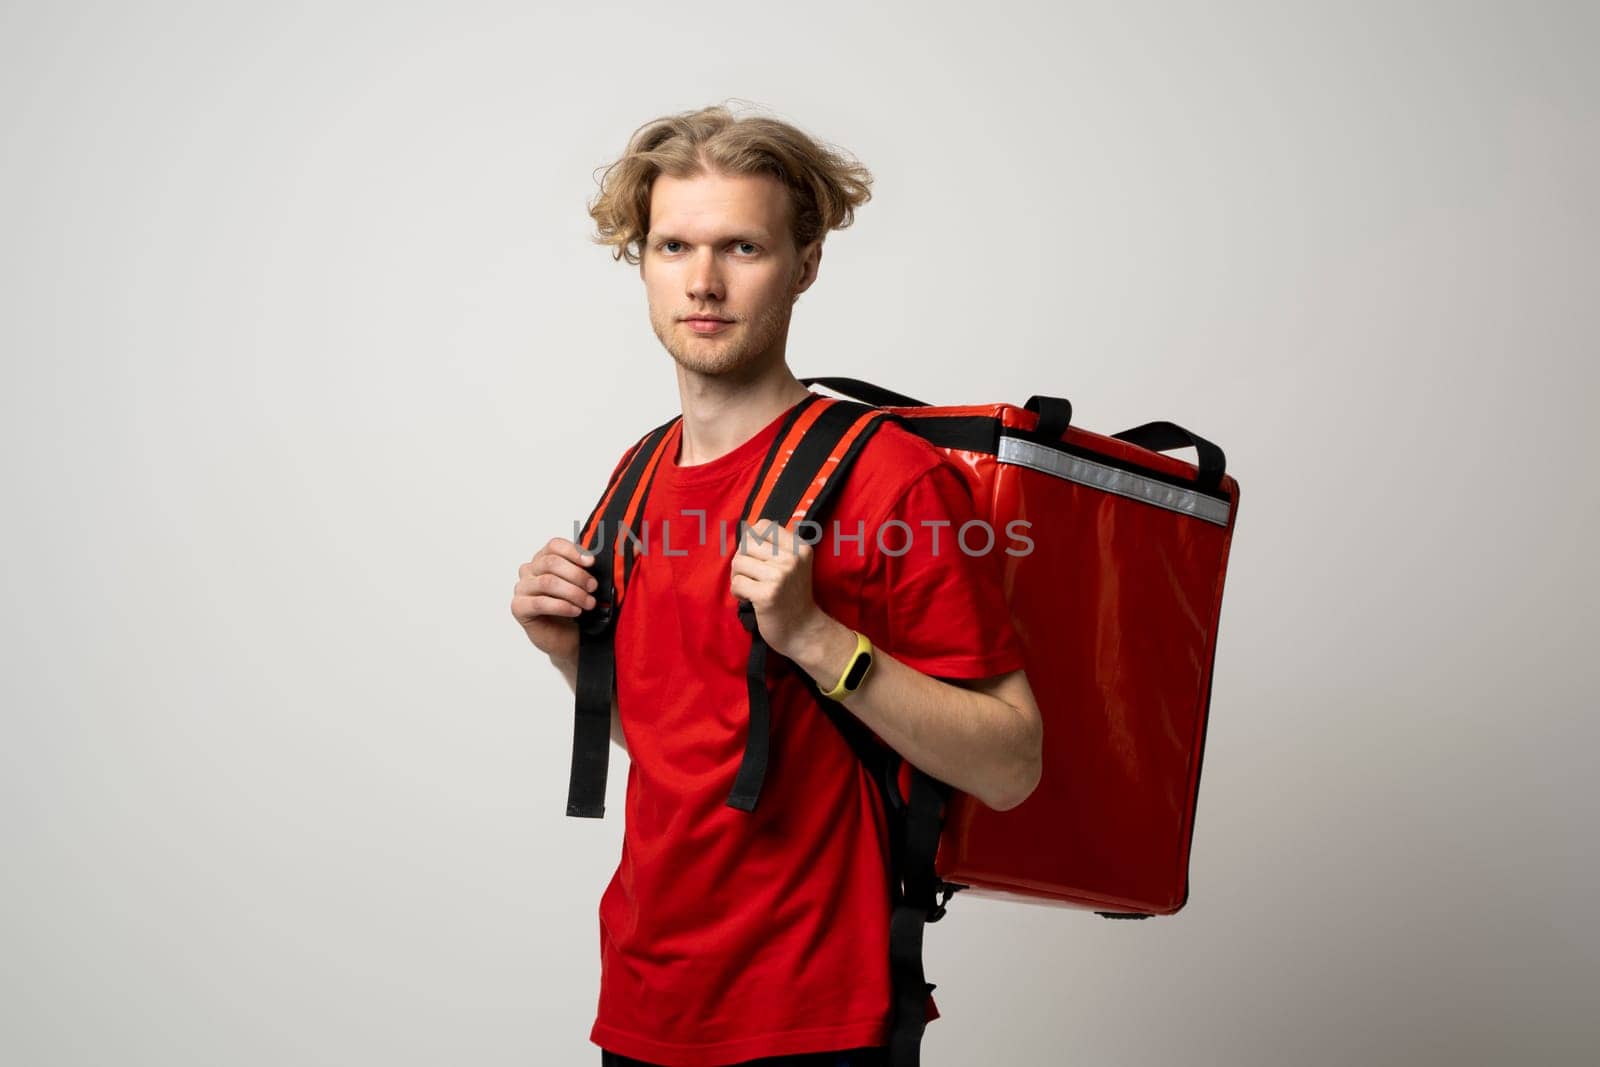 Delivery man in red uniform with thermal backpack for food. Takeaway food delivery. Man delivering online food orders to customers with red thermal bag, grocery deliver